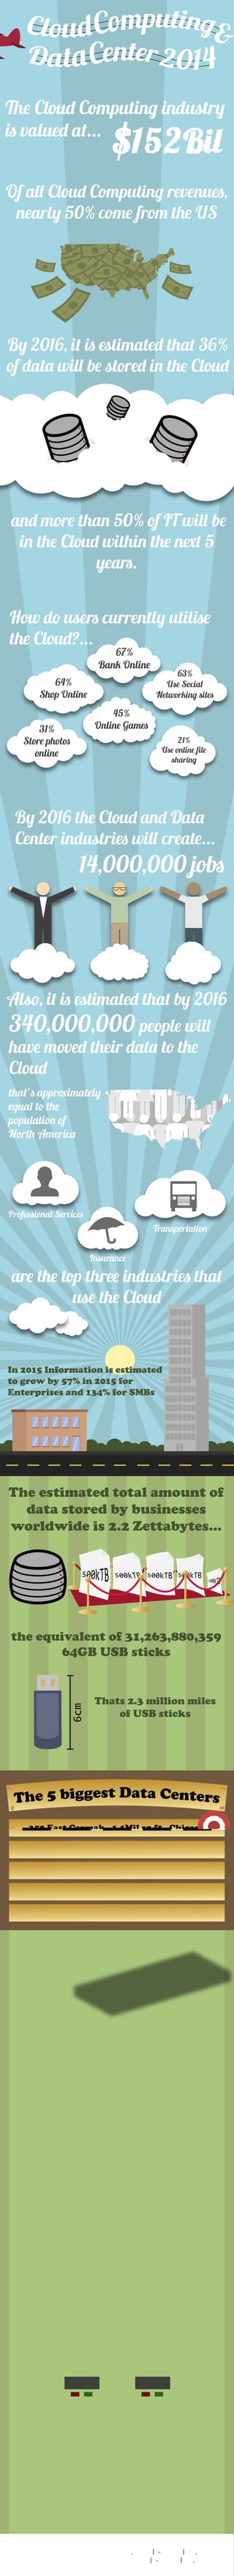 W: www.emerald-technology.com
E: info@emerald-technology.com
T: +44 (0)870 889 0300
Get in touch today:
How do users currently utilise
the Cloud?...
By 2016 the Cloud and Data
Center industries will create...
Also, it is estimated that by 2016
that’s approximately
equal to the
population of
North America
Of all Cloud Computing revenues,
nearly 50% come from the US
are the top three industries that
use the Cloud
By 2016, it is estimated that 36%
of data will be stored in the Cloud
and more than 50% of IT will be
in the Cloud within the next 5
years.
14,000,000 jobs
340,000,000 people will
have moved their data to the
Cloud
The Cloud Computing industry
is valued at...
67%
Bank Online
64%
Shop Online
21%
Use online file
sharing
31%
Store photos
online
45%
Online Games
63%
Use Social
Networking sites
In 2015 Information is estimated
to grow by 57% in 2015 for
Enterprises and 134% for SMBs
the equivalent of 31,263,880,359
64GB USB sticks
71% of Enterprises say that
Data Centers are essential to
generating revenue.
90% of Data Centers experienced an
outage in the last 24 months
The average power outage was
350 East Cermak - 1.1Mil sq.ft - Chicago
Metro Technology Center - 990k sq.ft - Atlan
The NAP of the Americas - 750k sq.ft - Miami
NGB Europe - 750k sq.ft - New Port Wales
350 East
Cermak is
roughly the
same size as
19 soccer
fields
Microsoft - 550k sq.ft - Dublin
Professional Services
Insurance
Transportation
On average, unscheduled down time
cost approximately $9,700 per minute
totaling between $669,300 and
$1,173,700 in losses per outage
The estimated total amount of
data stored by businesses
worldwide is 2.2 Zettabytes...
Thats 2.3 million miles
of USB sticks
6cm
between & minutes
 